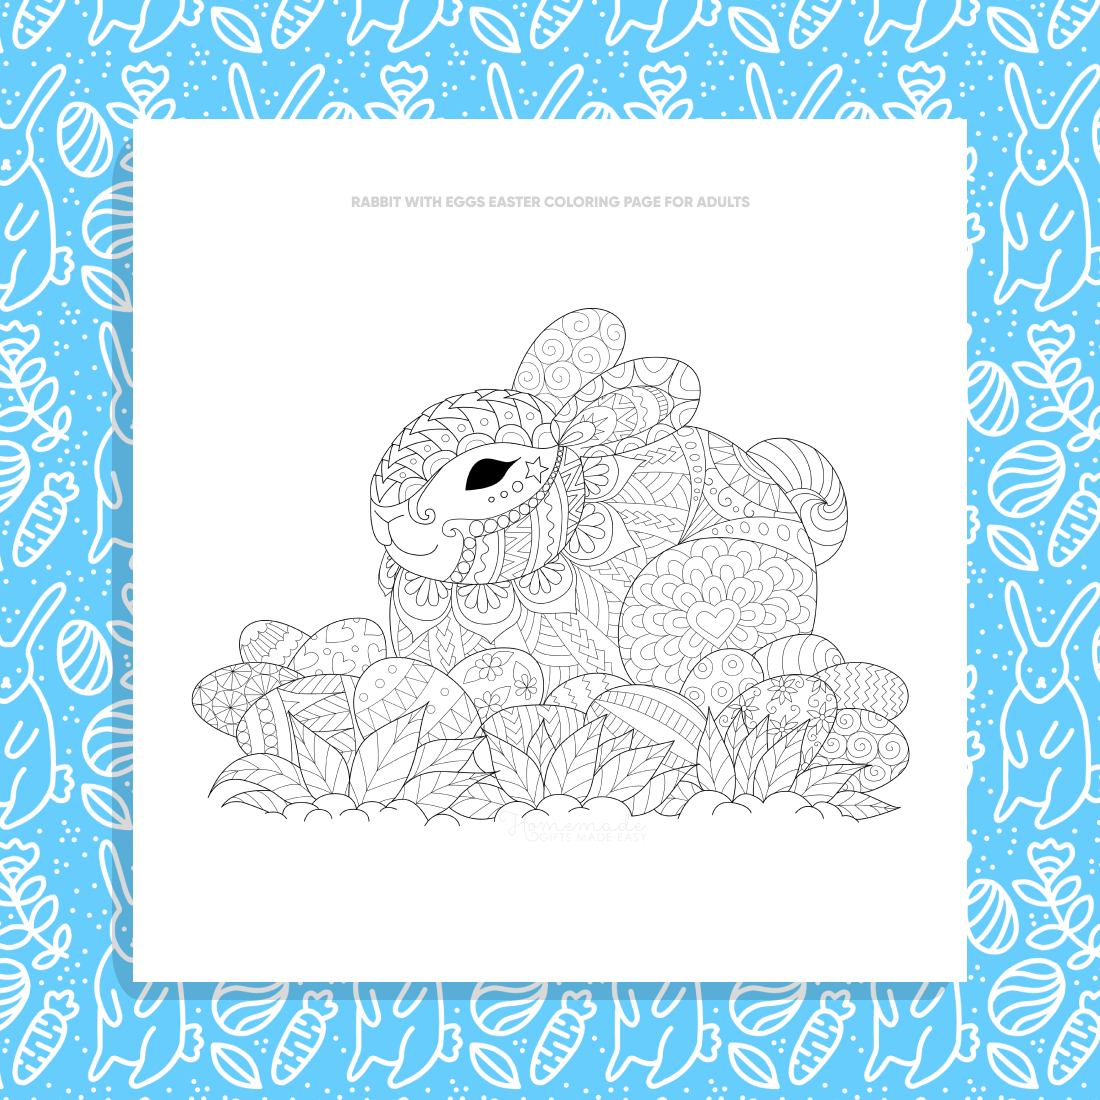 Rabbit with Eggs Easter Coloring Page for Adults preview.